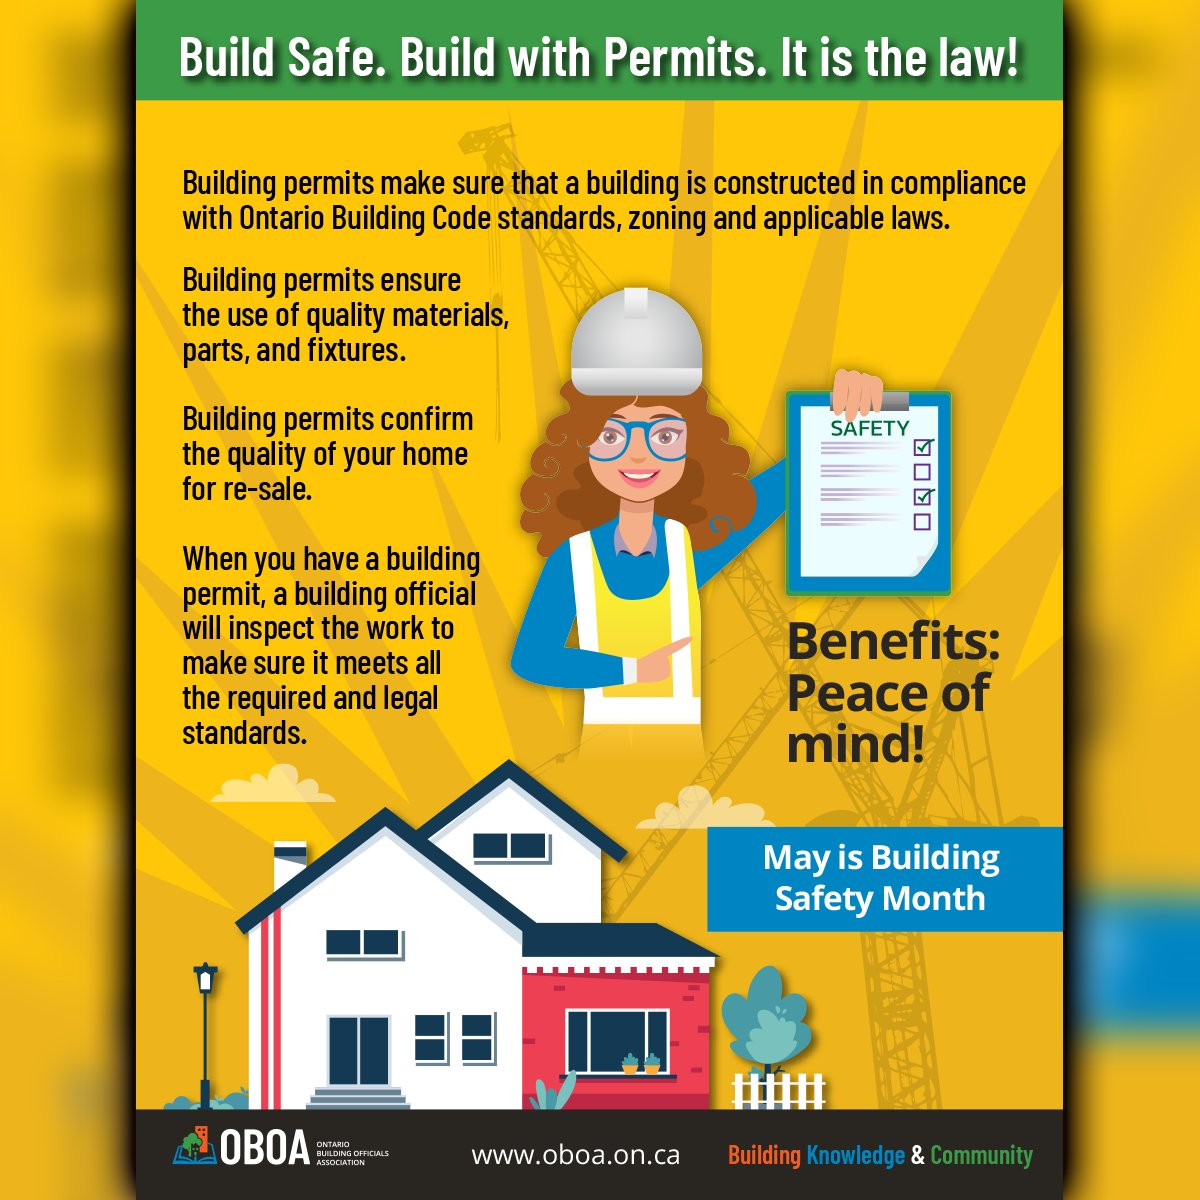 For Building Safety Month, the Township of Huron-Kinloss Building & Planning Department and the @OBOA_Office want to remind folks that Building permits make sure things are constructed in compliance with Ontario Building Code standards, zoning and applicable laws. #BuildSafe